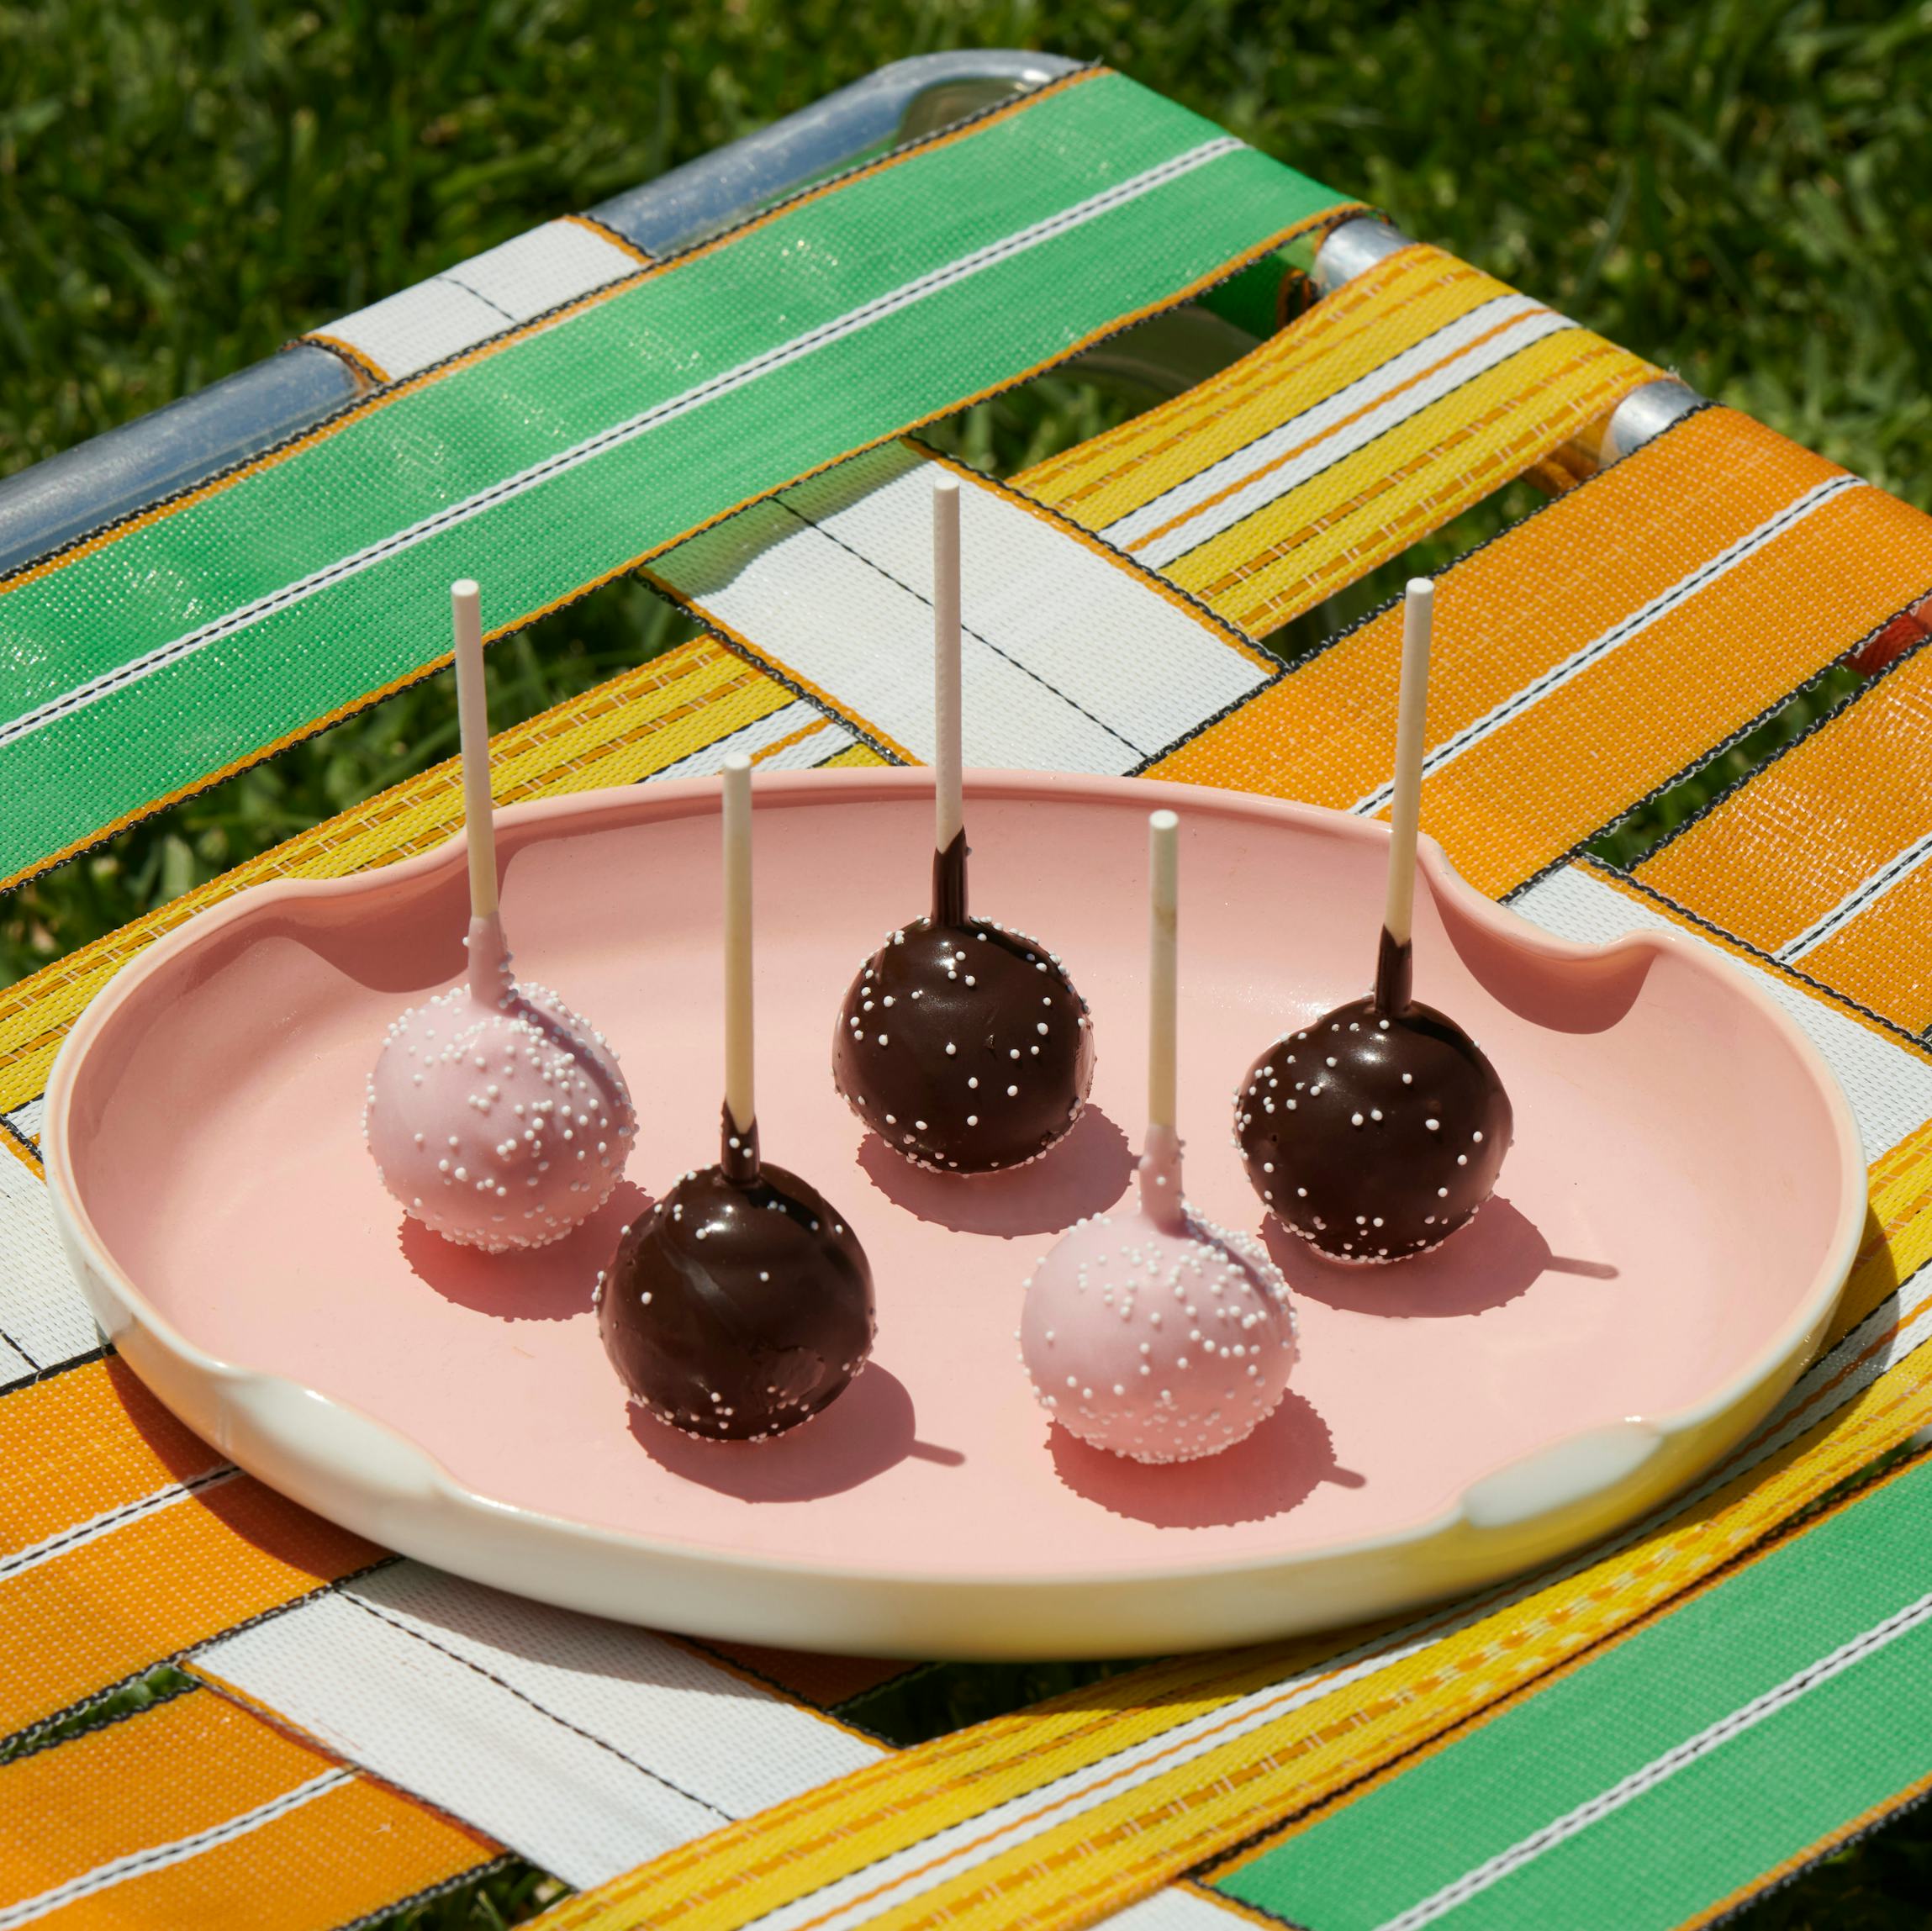 Cake pops made from upcycling leftover grains. Image source: Upcycled Foods, Inc